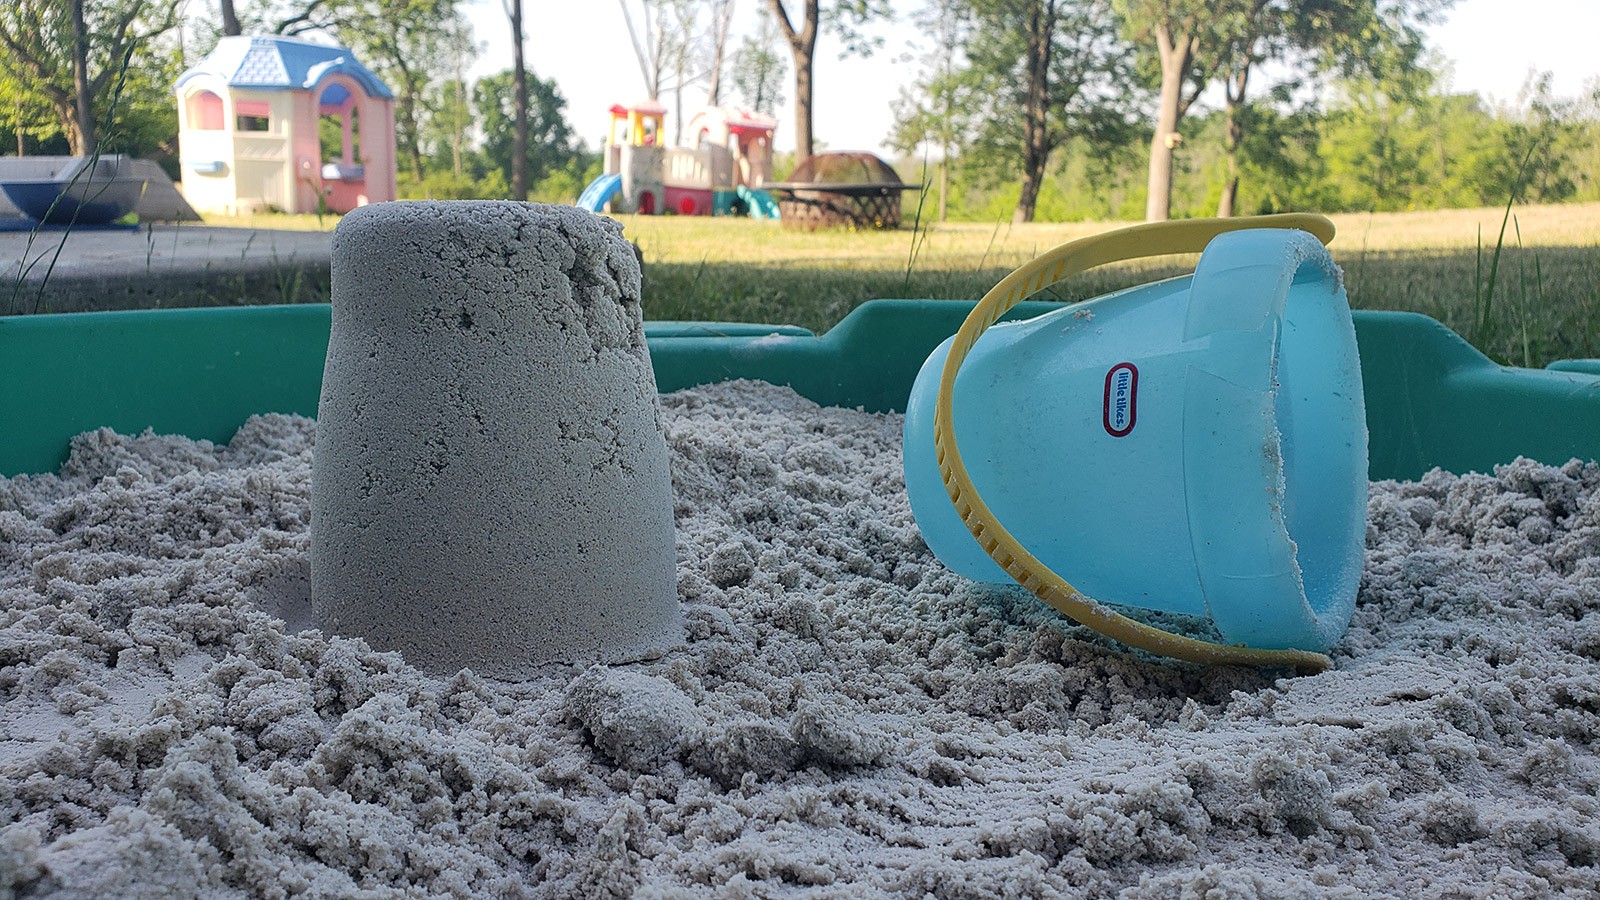 A small sandcastle stands next to the bucket used to make it.